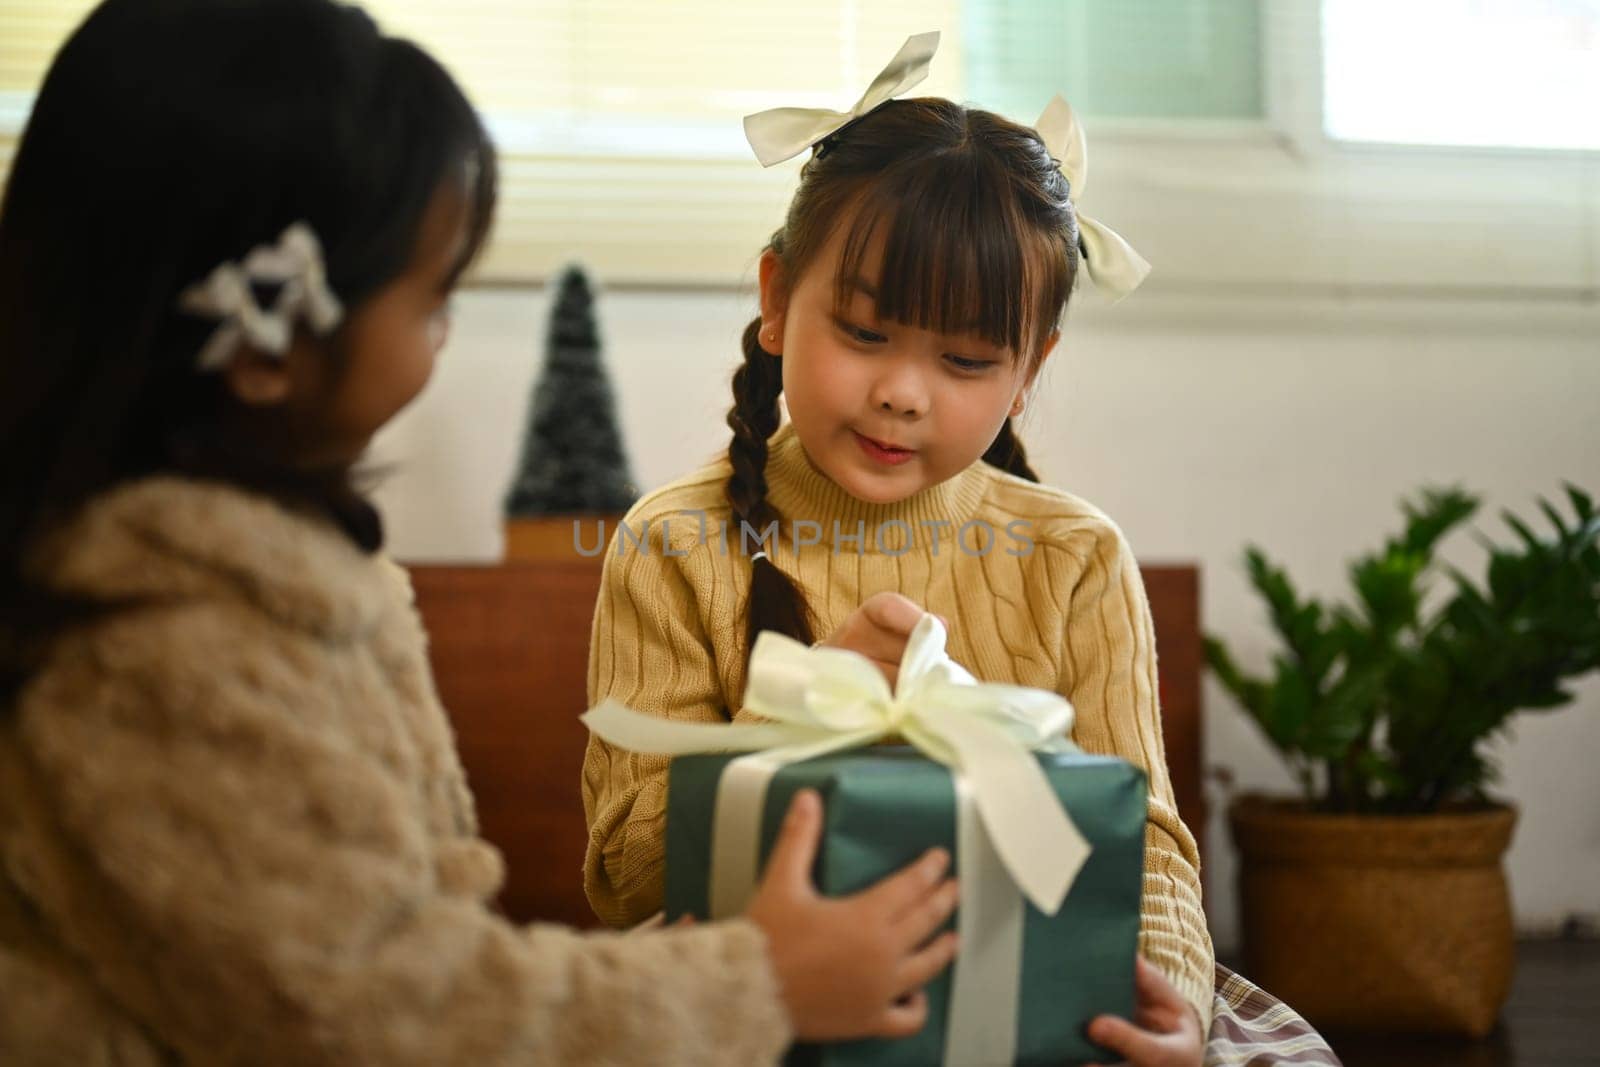 Two sisters exchanging Christmas presents, celebrating on winter holidays together at home.